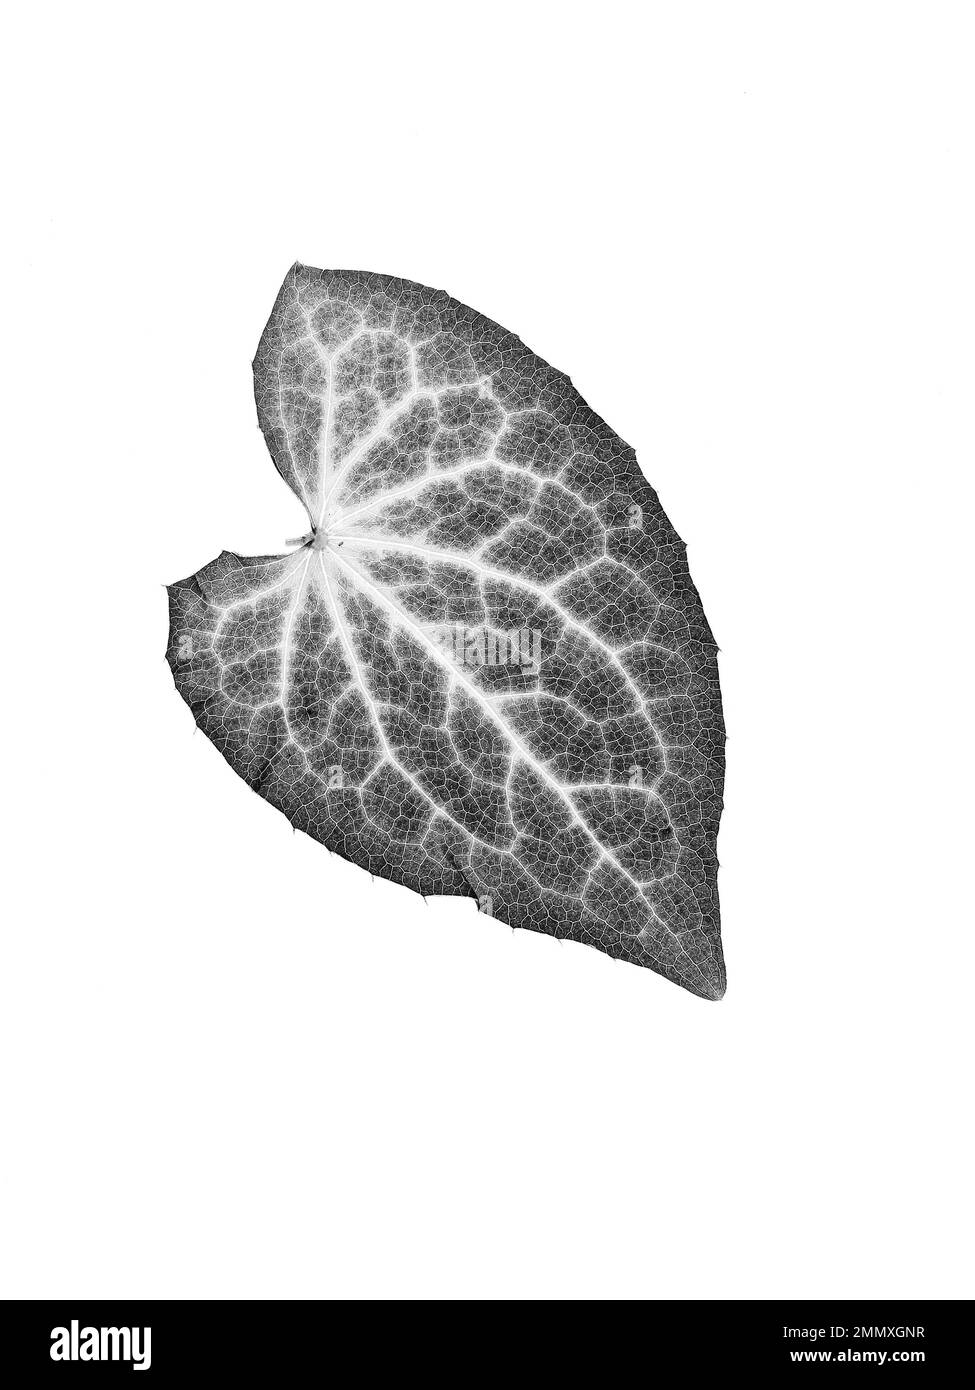 A black and white close up of a single Epimedium leaf against a white background. Stock Photo